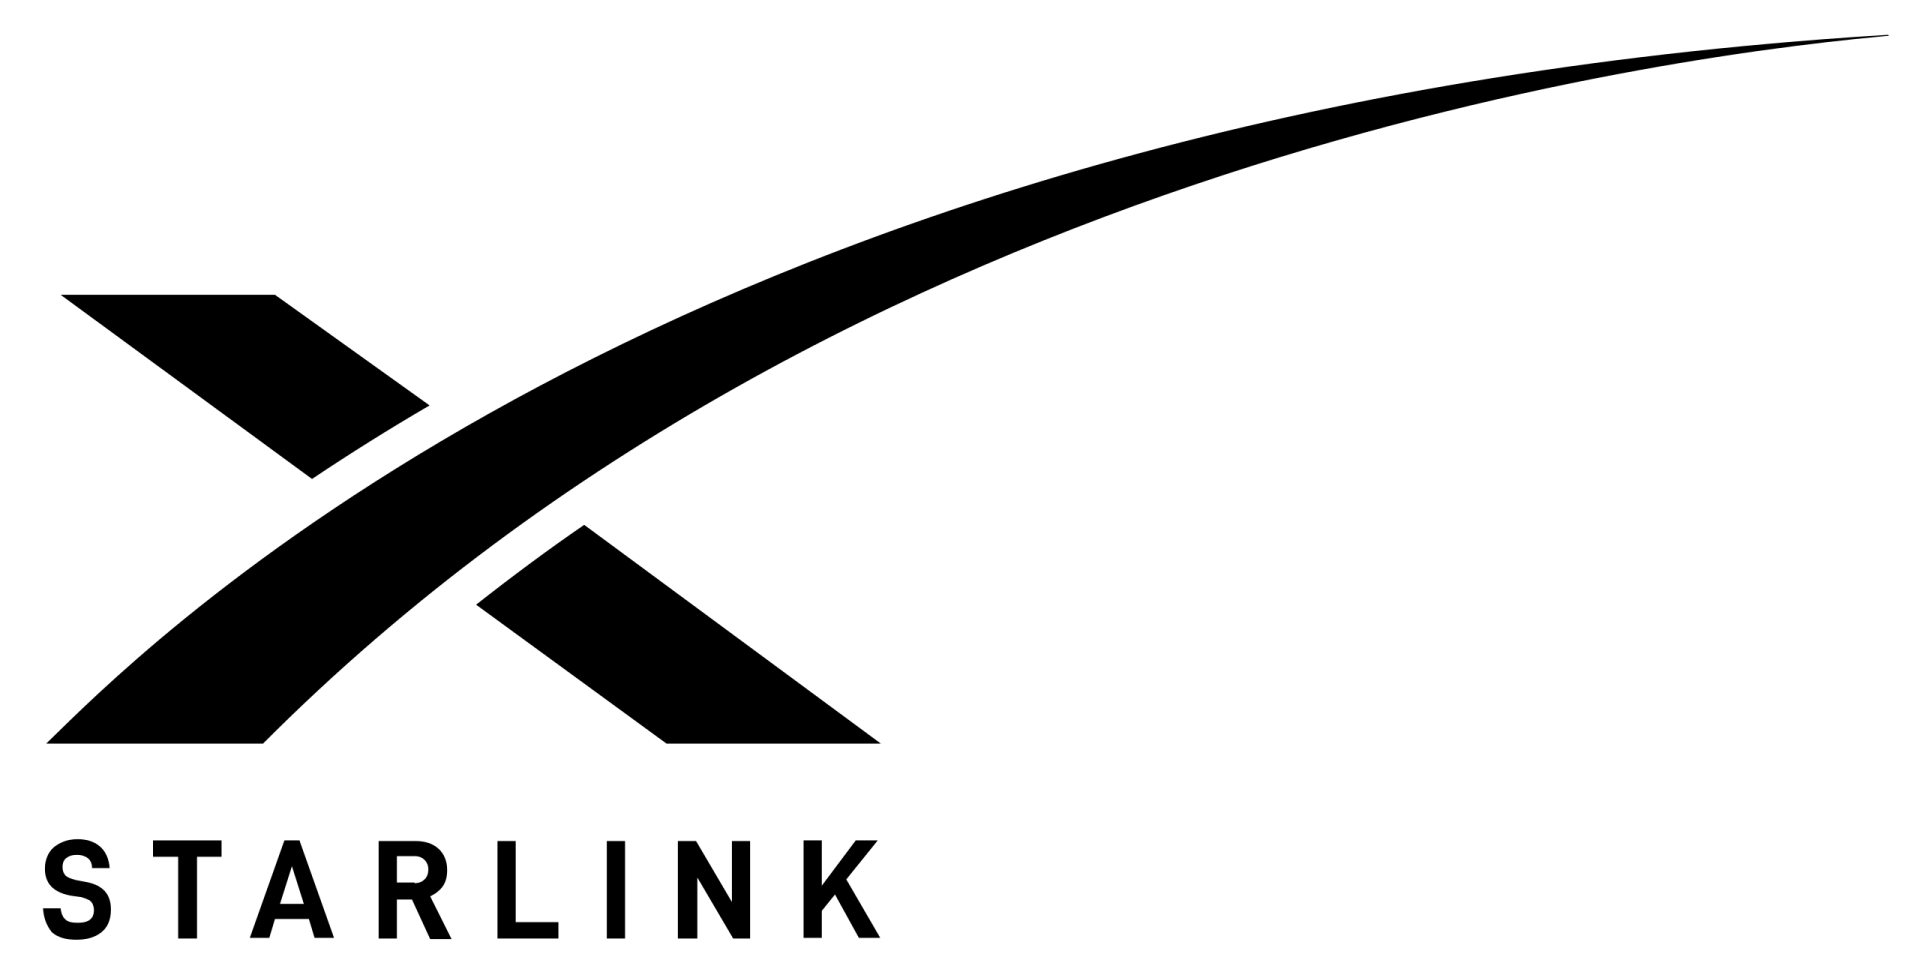 A black and white logo for starlink on a white background.